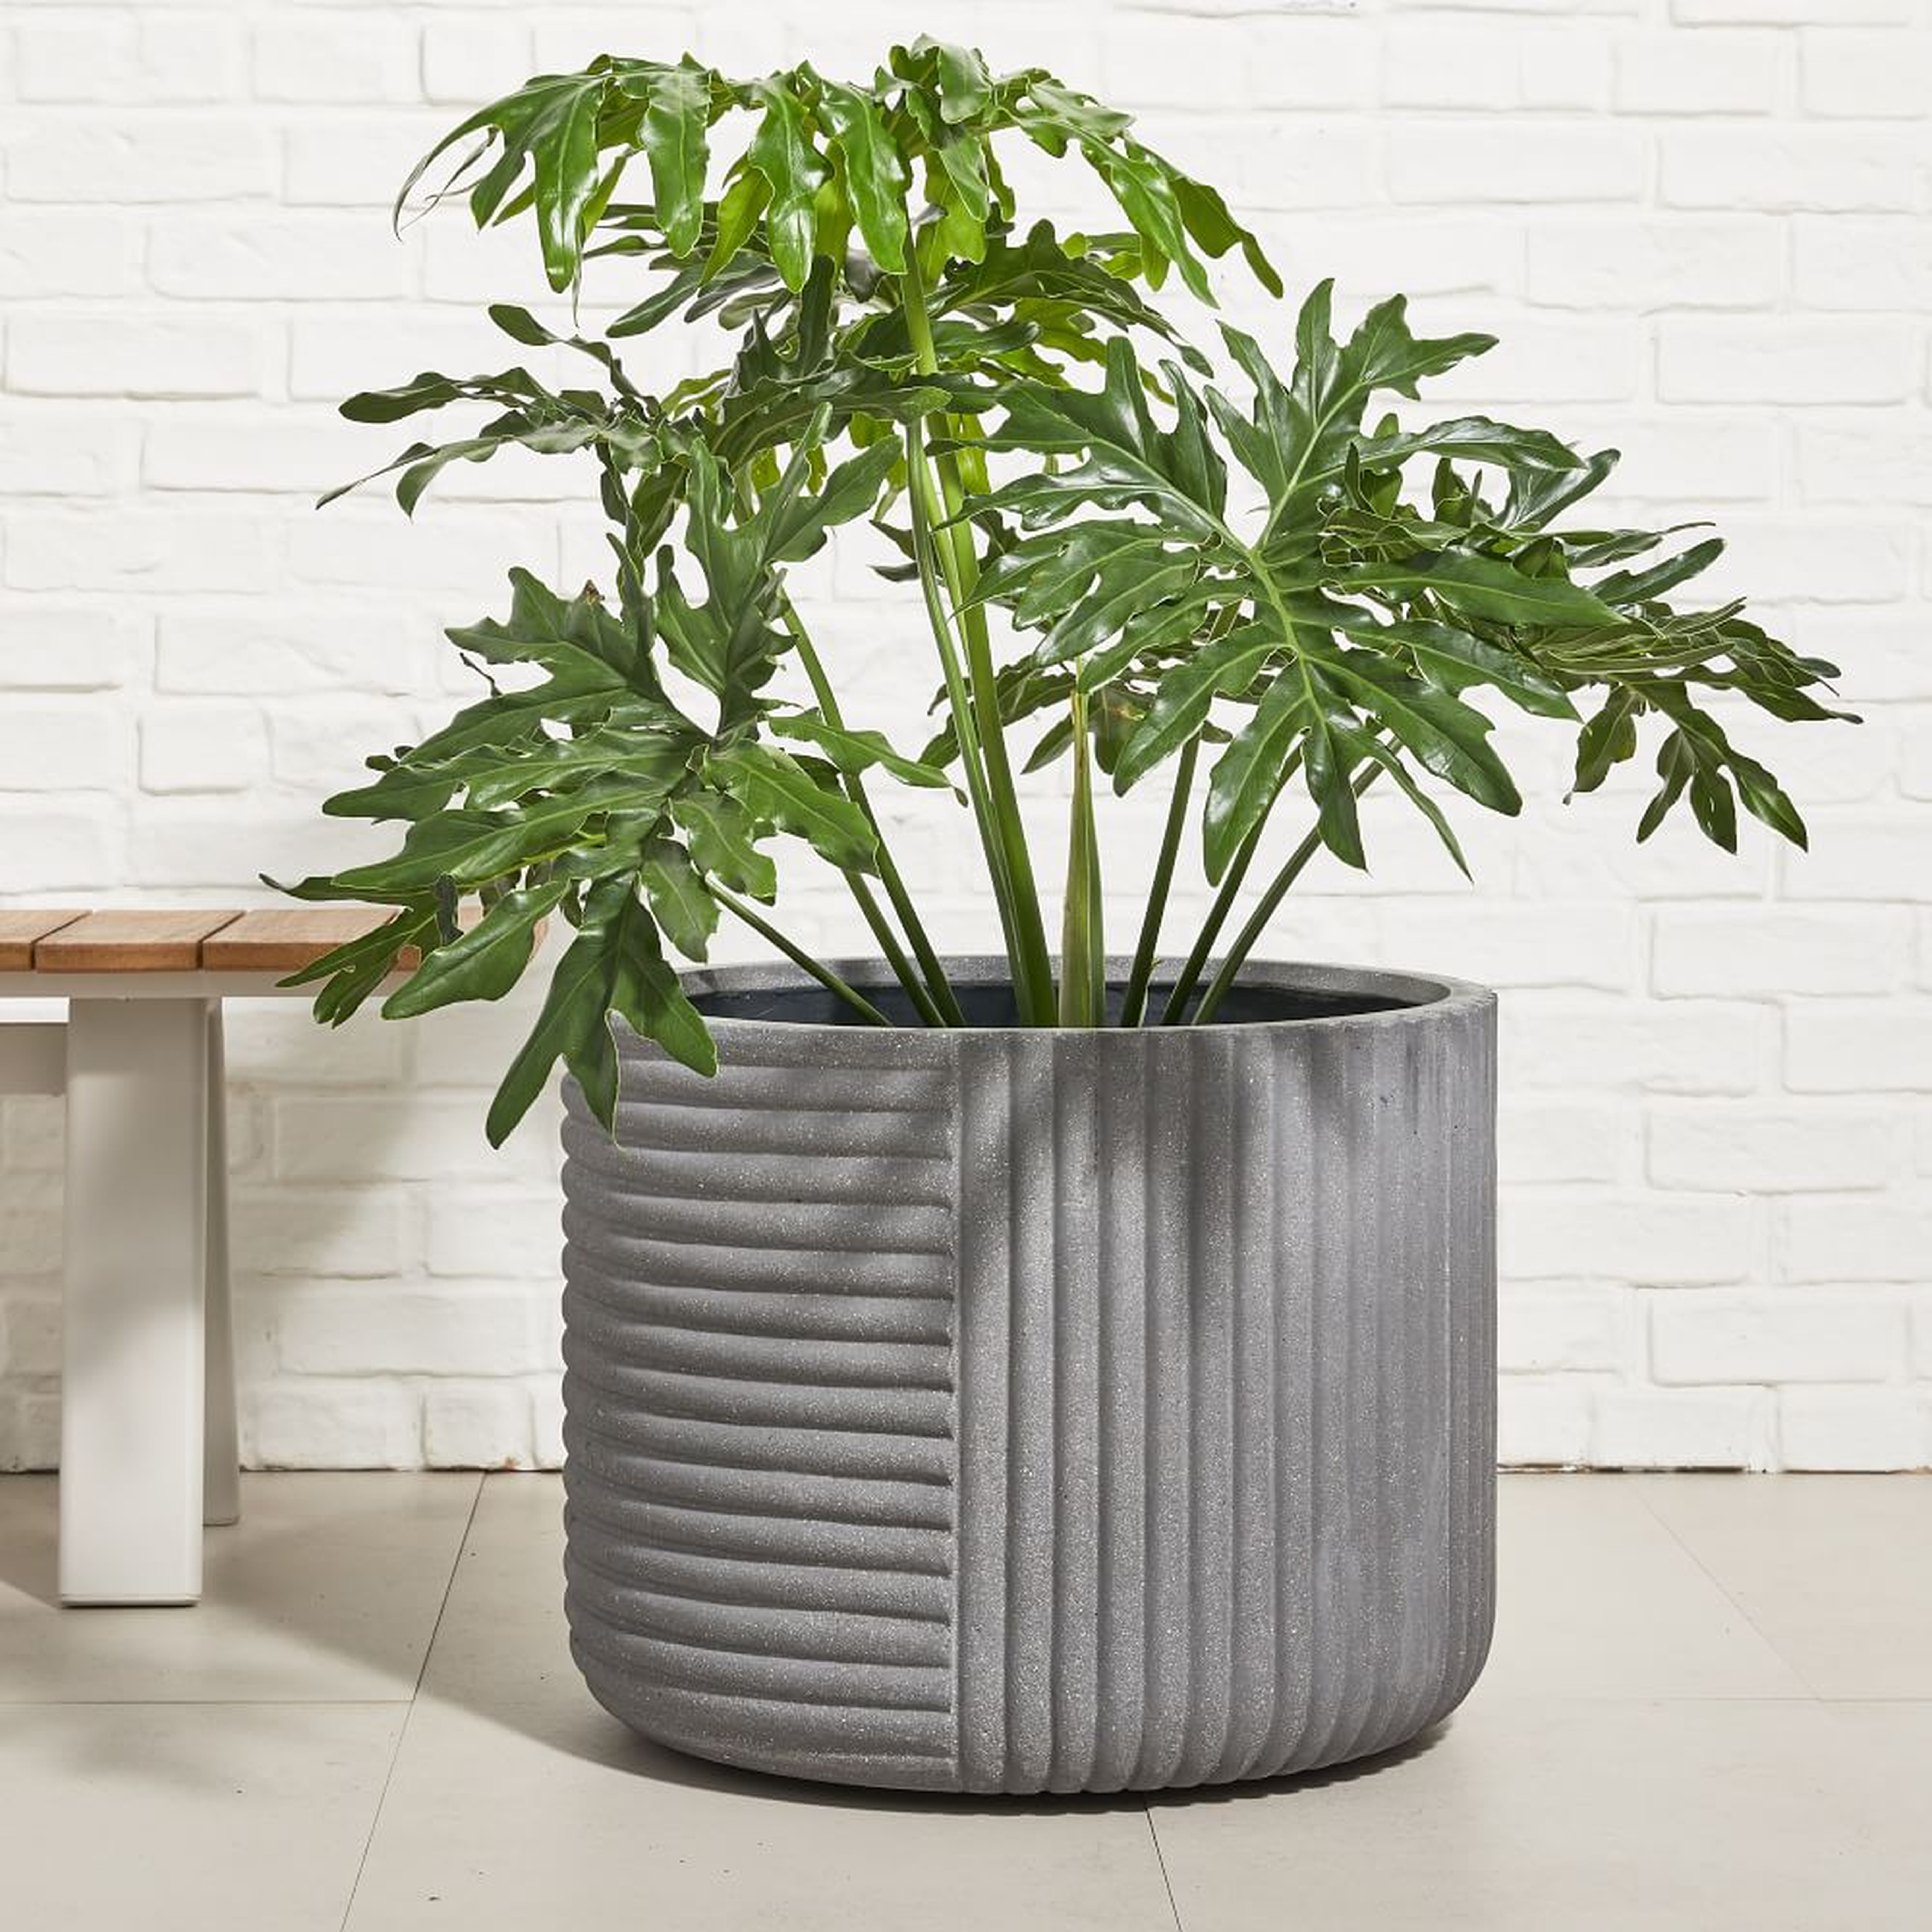 Cecilia Ficonstone Indoor/Outdoor Planter, Large, 22.8"D x 18.1"H, Frost Gray - West Elm